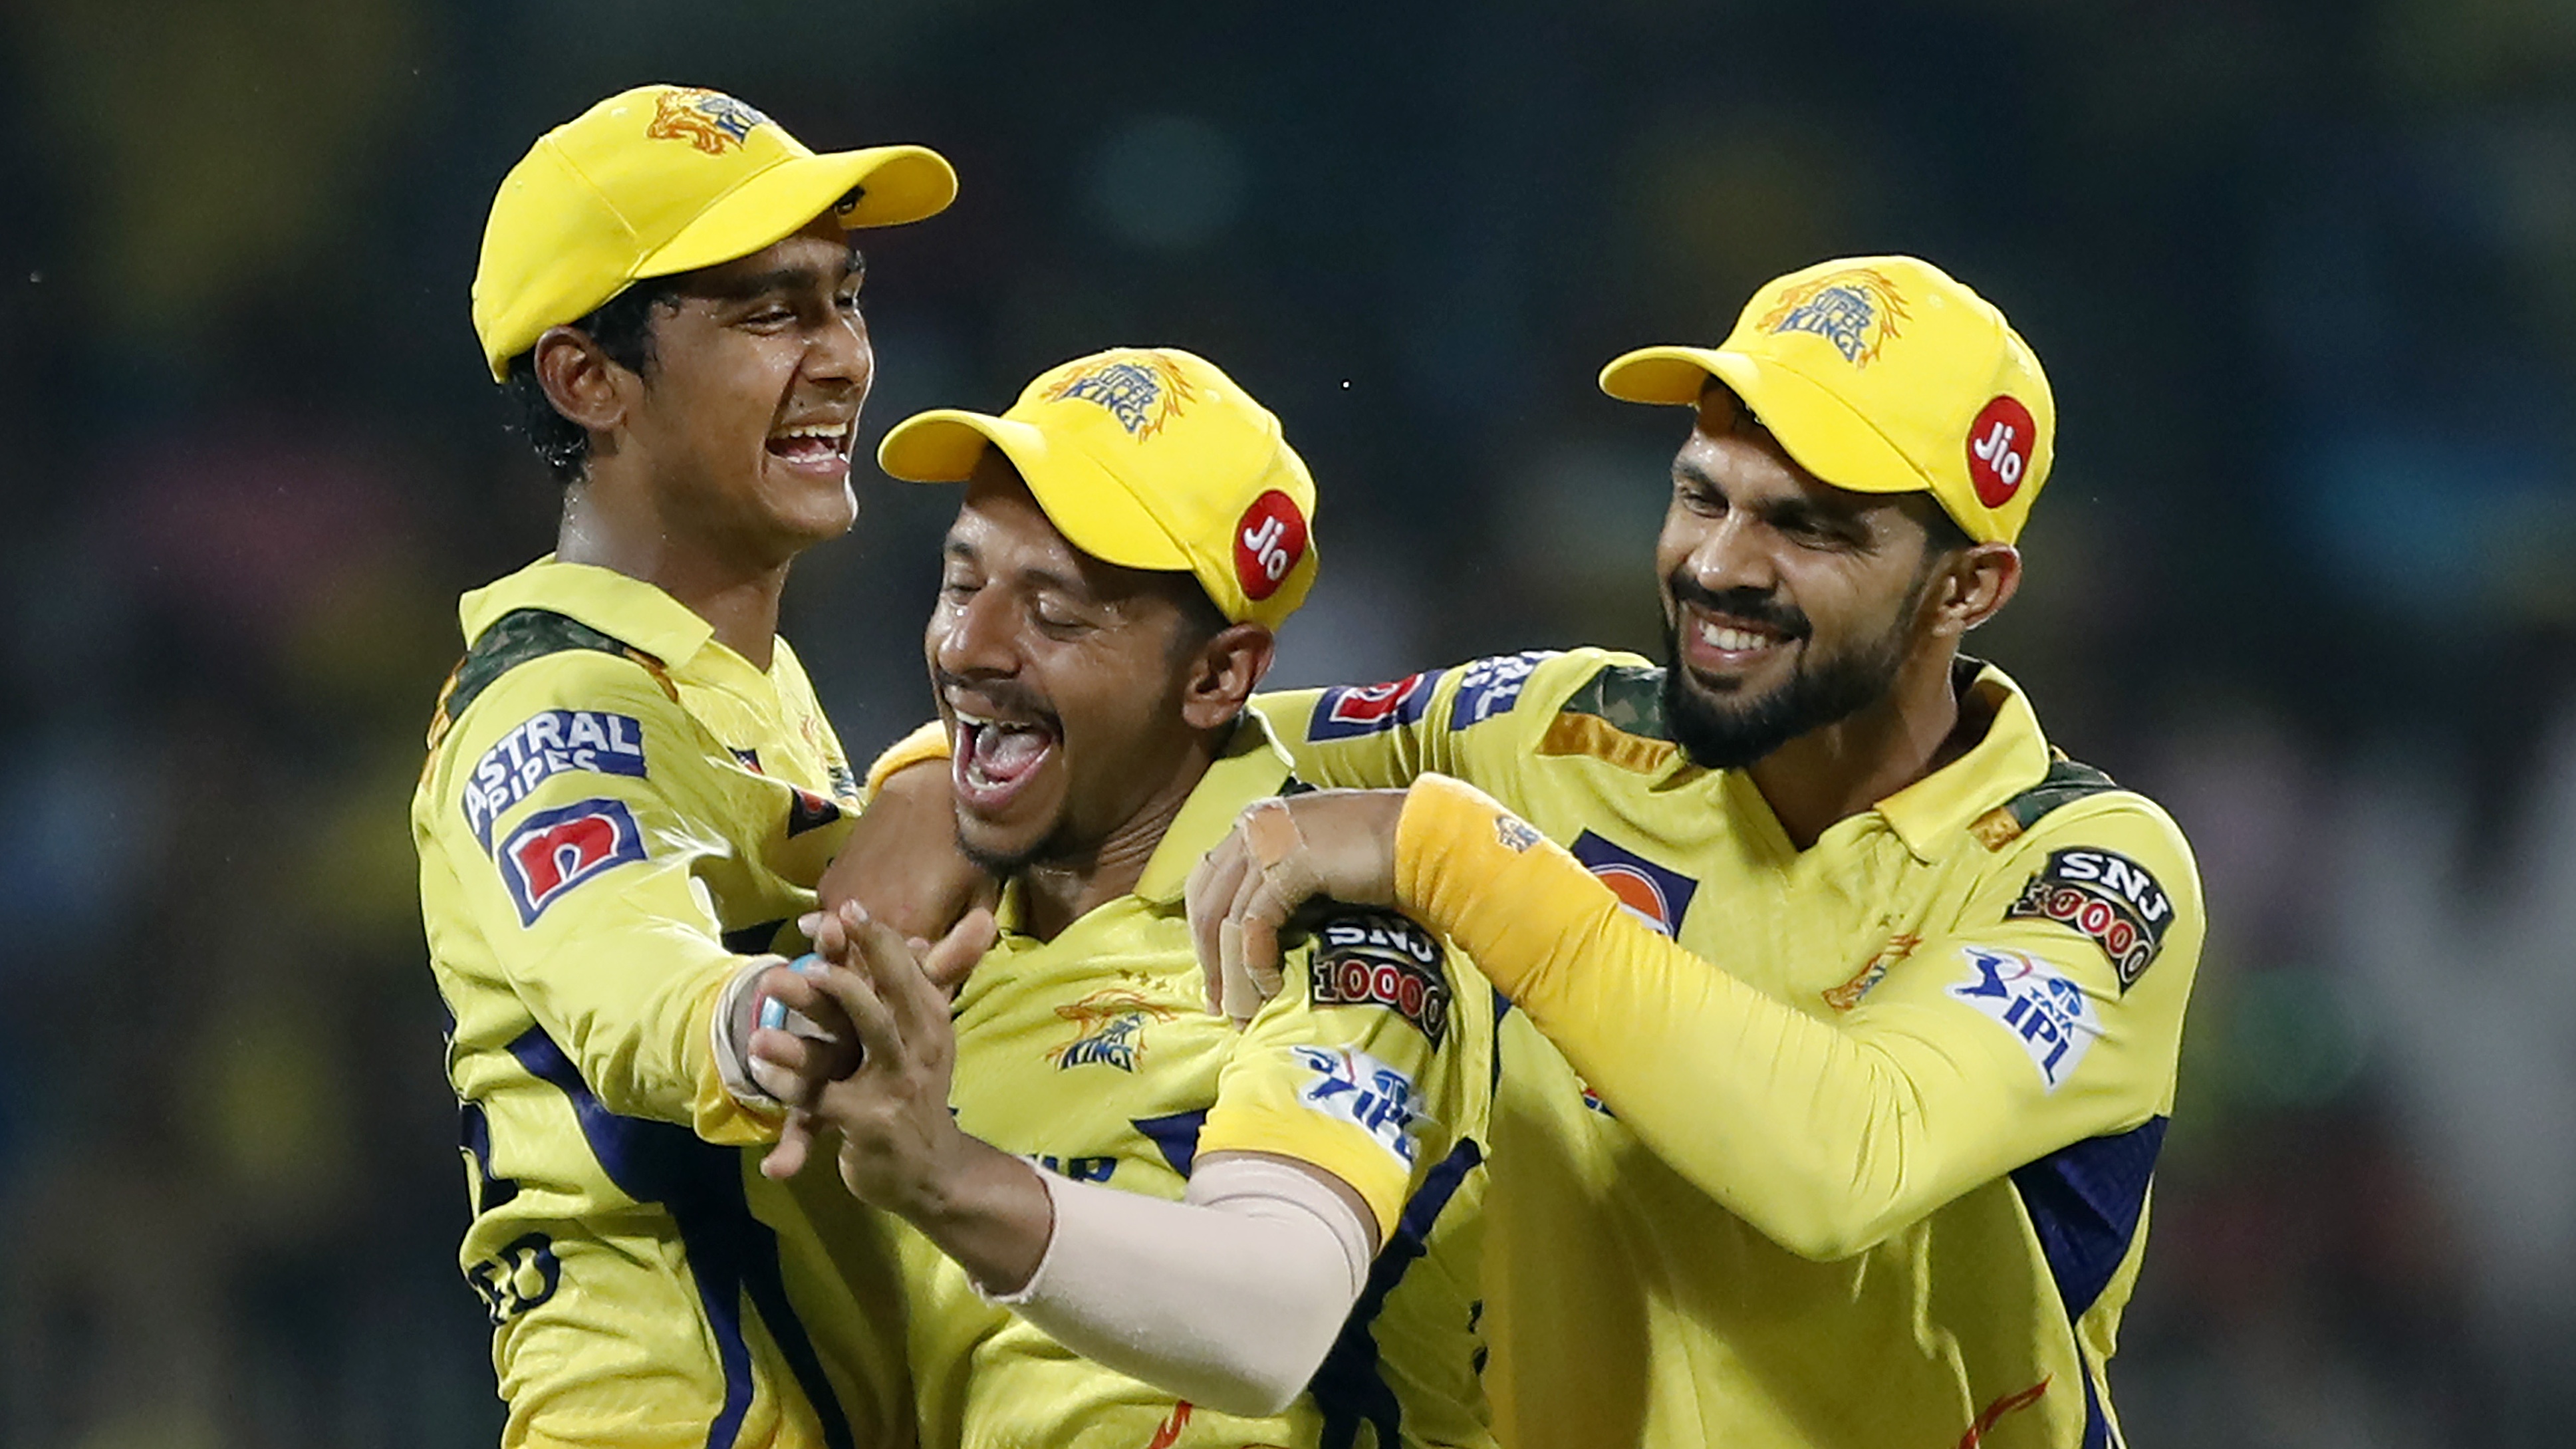 csk today match live video